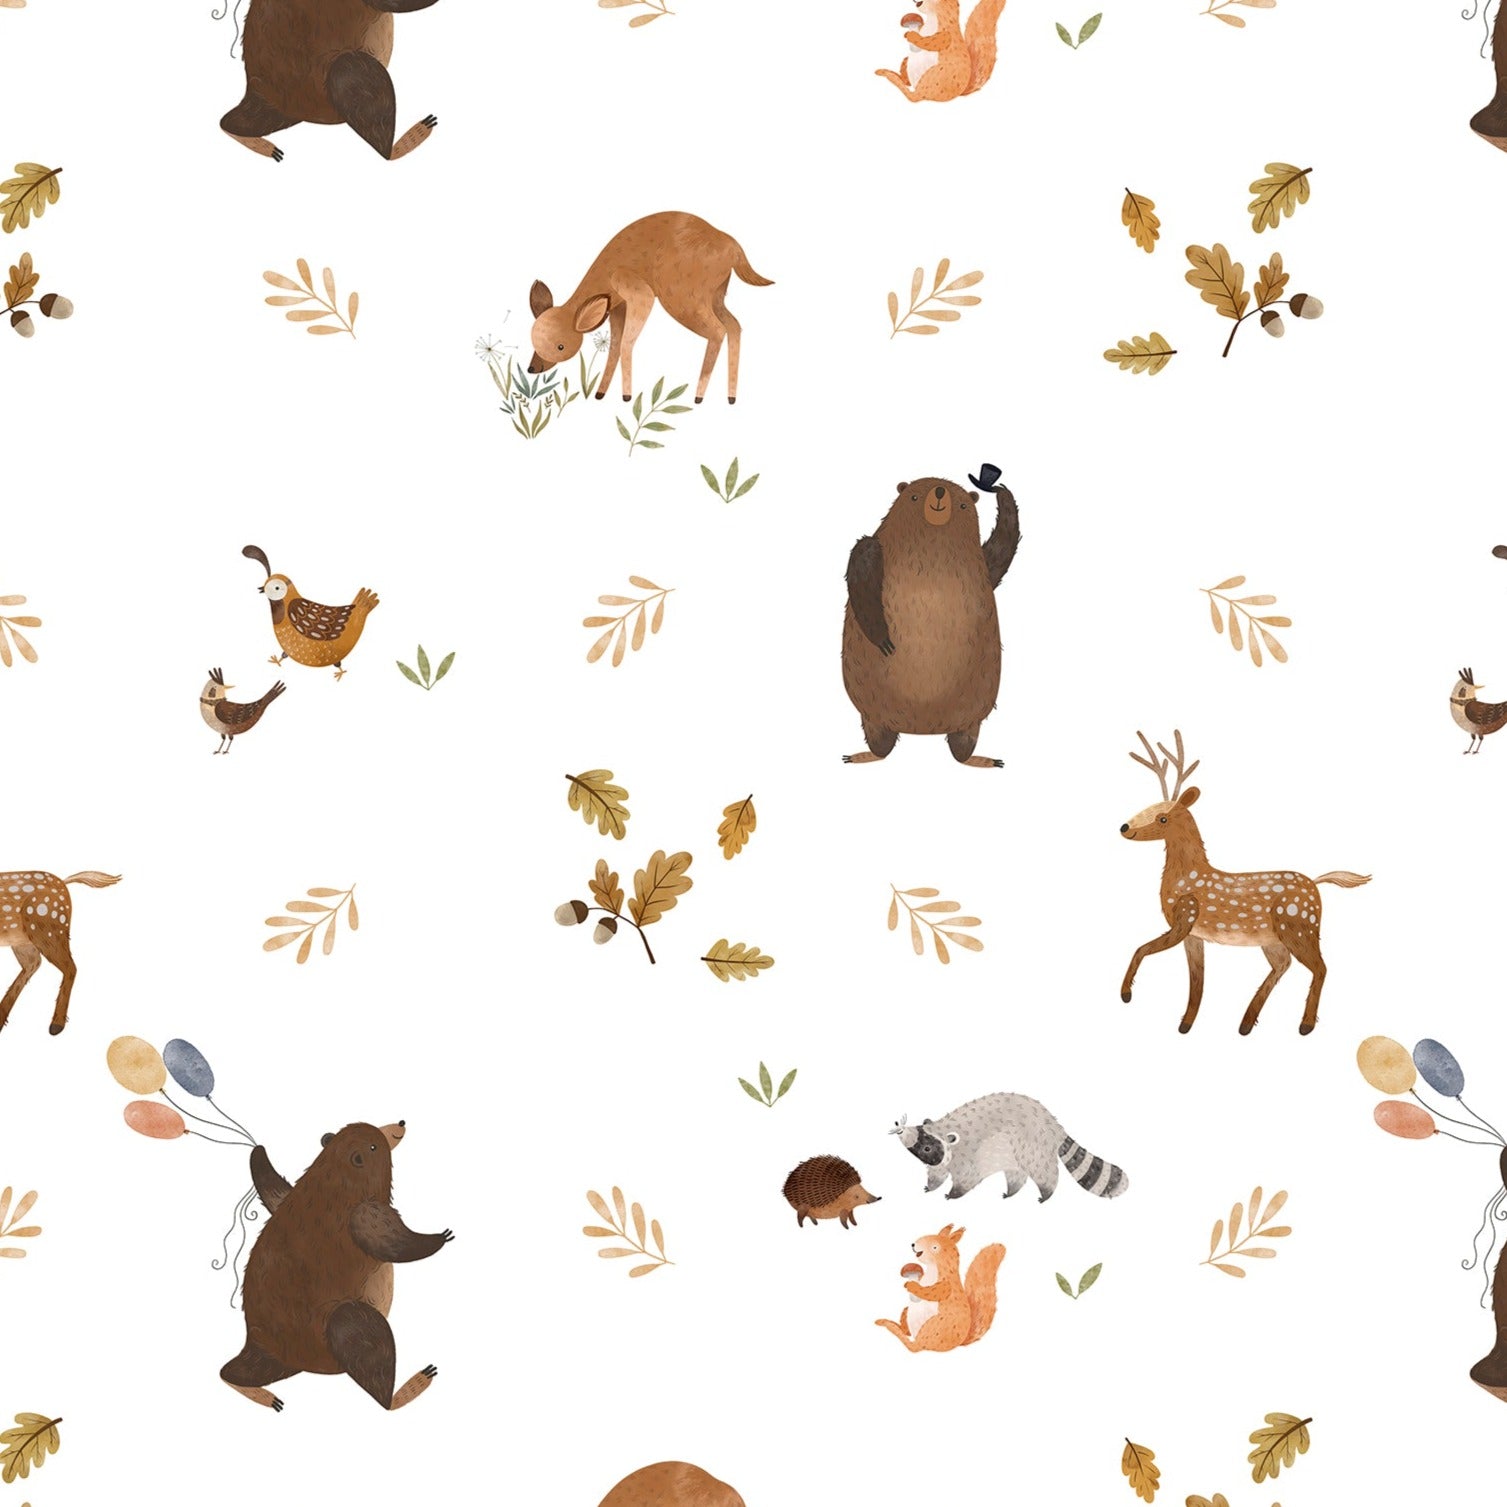 Vibrant illustration of Forest Bear Wallpaper featuring an array of forest animals like bears, deer, raccoons, and foxes interspersed with small foliage and acorns on a clean, white background, creating a playful and enchanting forest scene